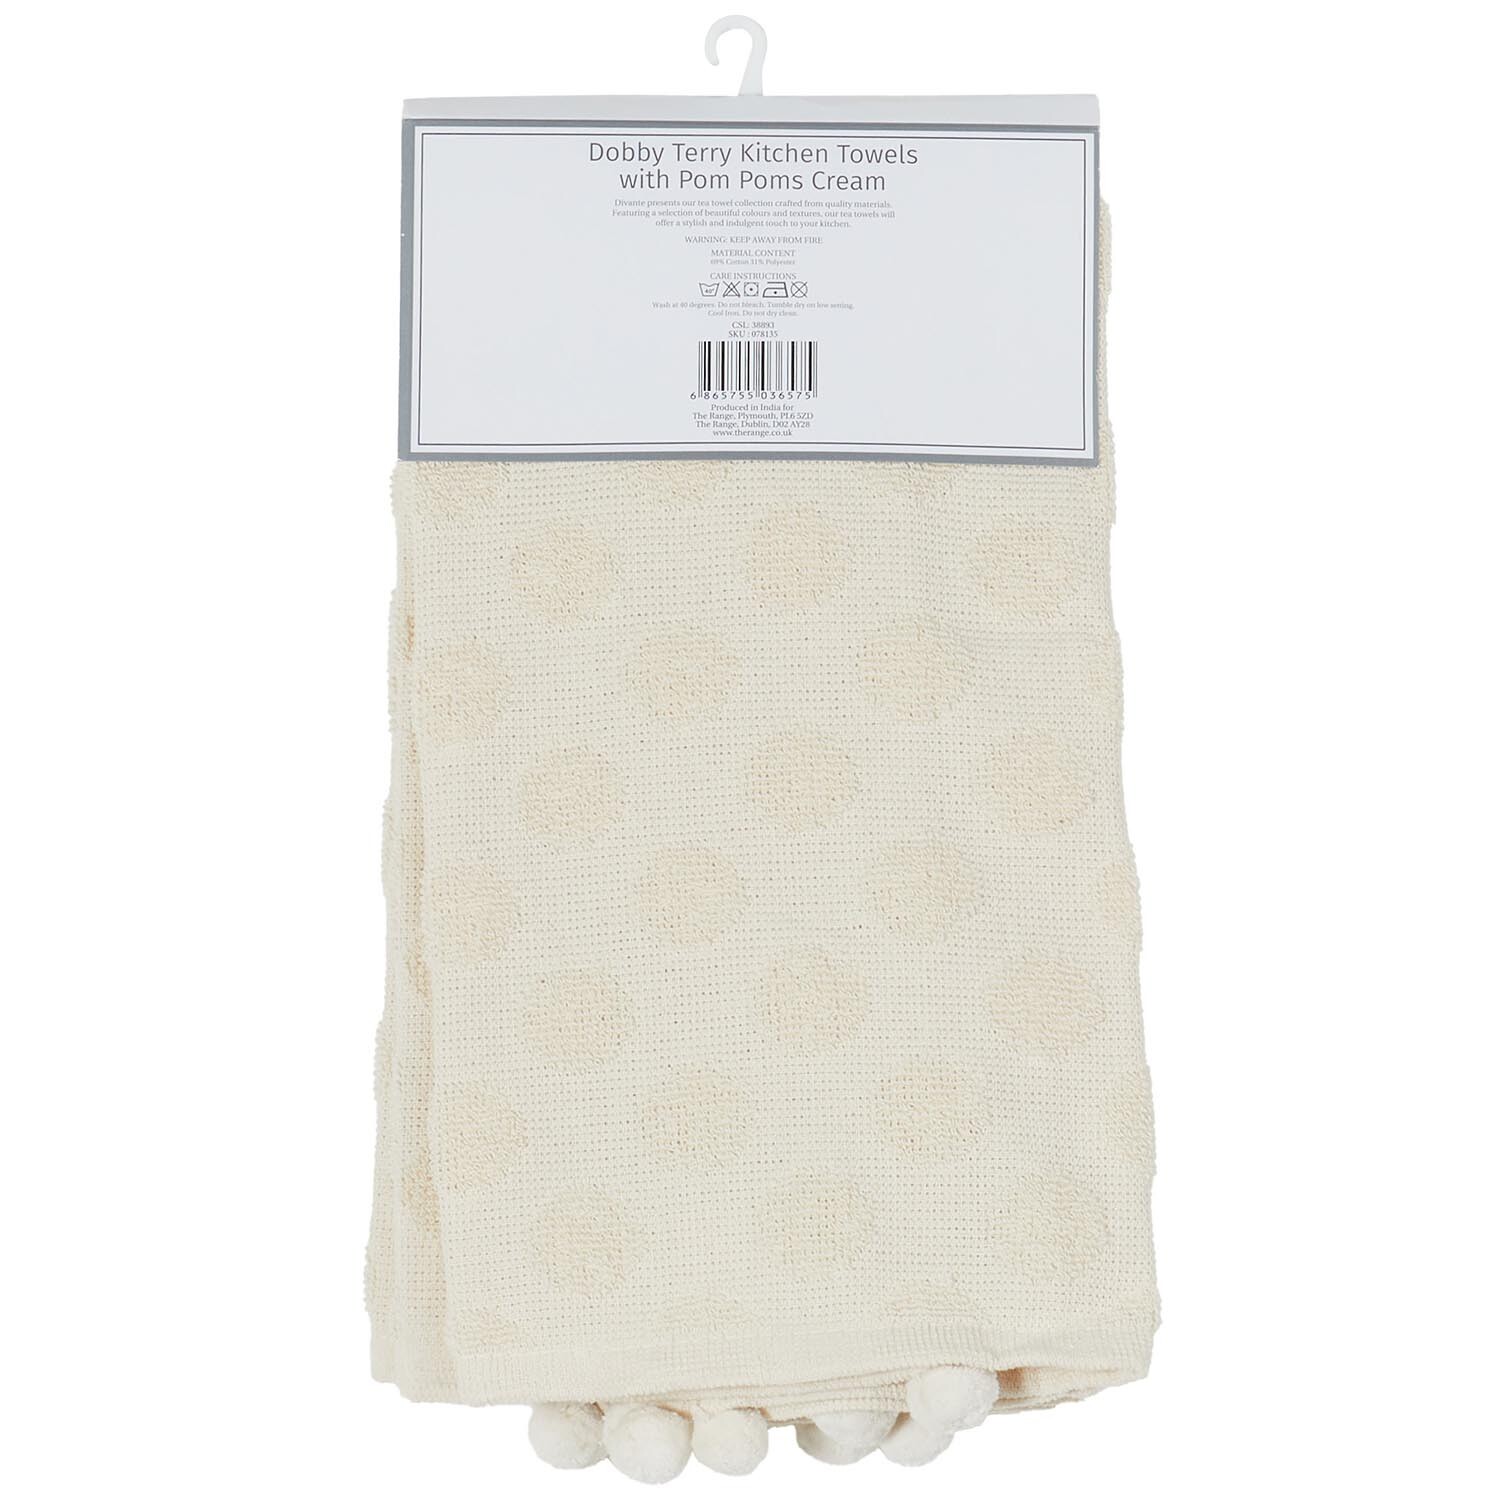 Pack of 2 Dobby Terry Kitchen Towels with Pom Poms - Cream Image 2